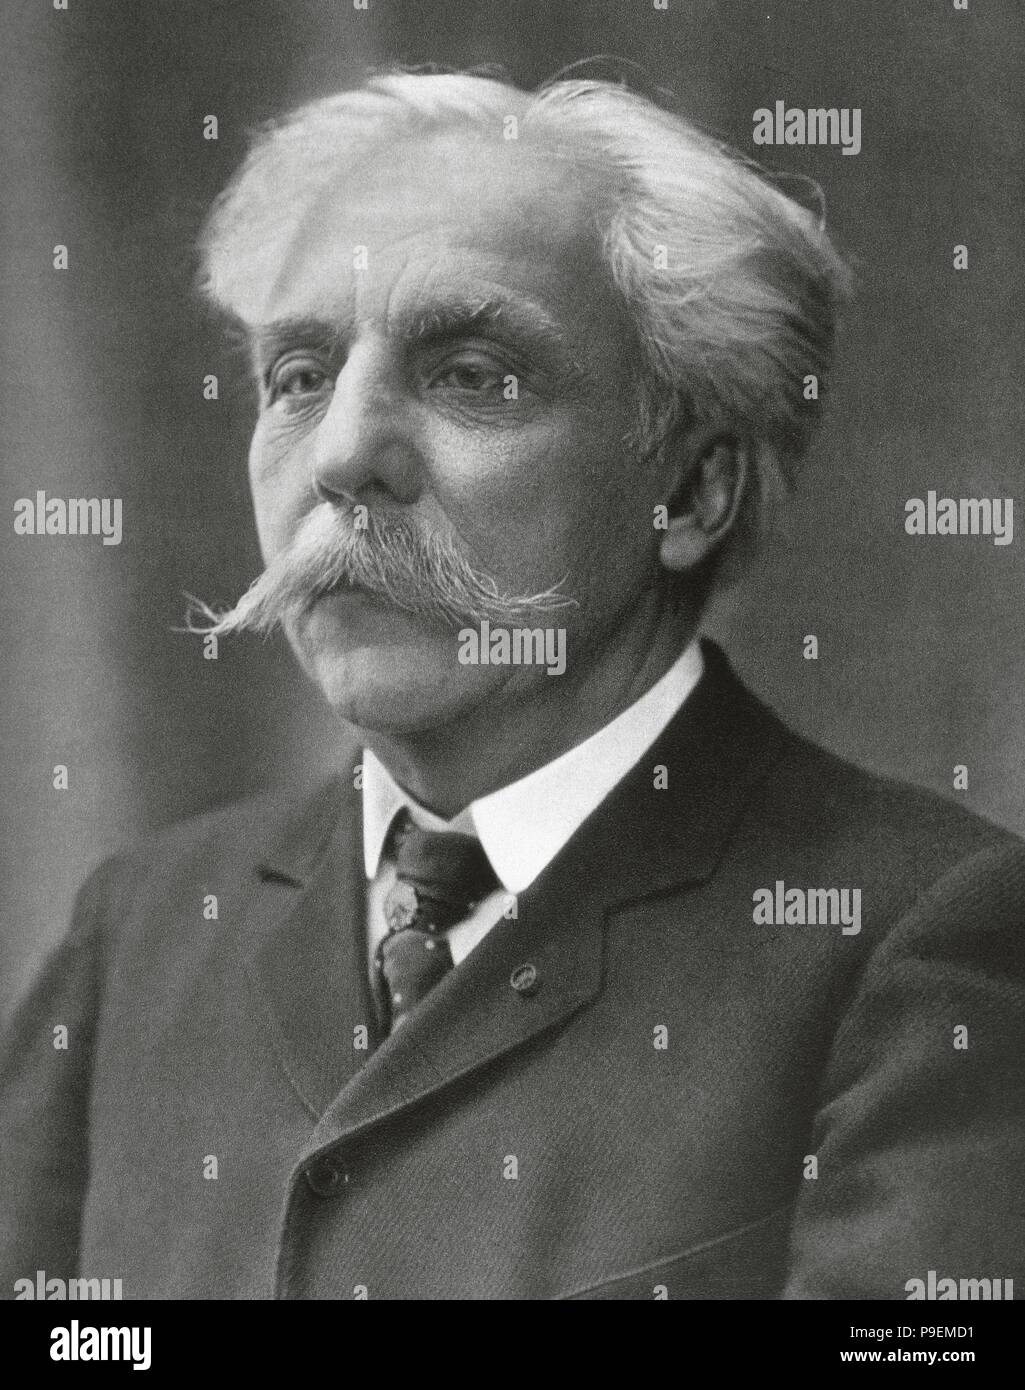 Gabriel Faure(1845-1924). French composer, pianist and organist. Portrait. Photography. Stock Photo